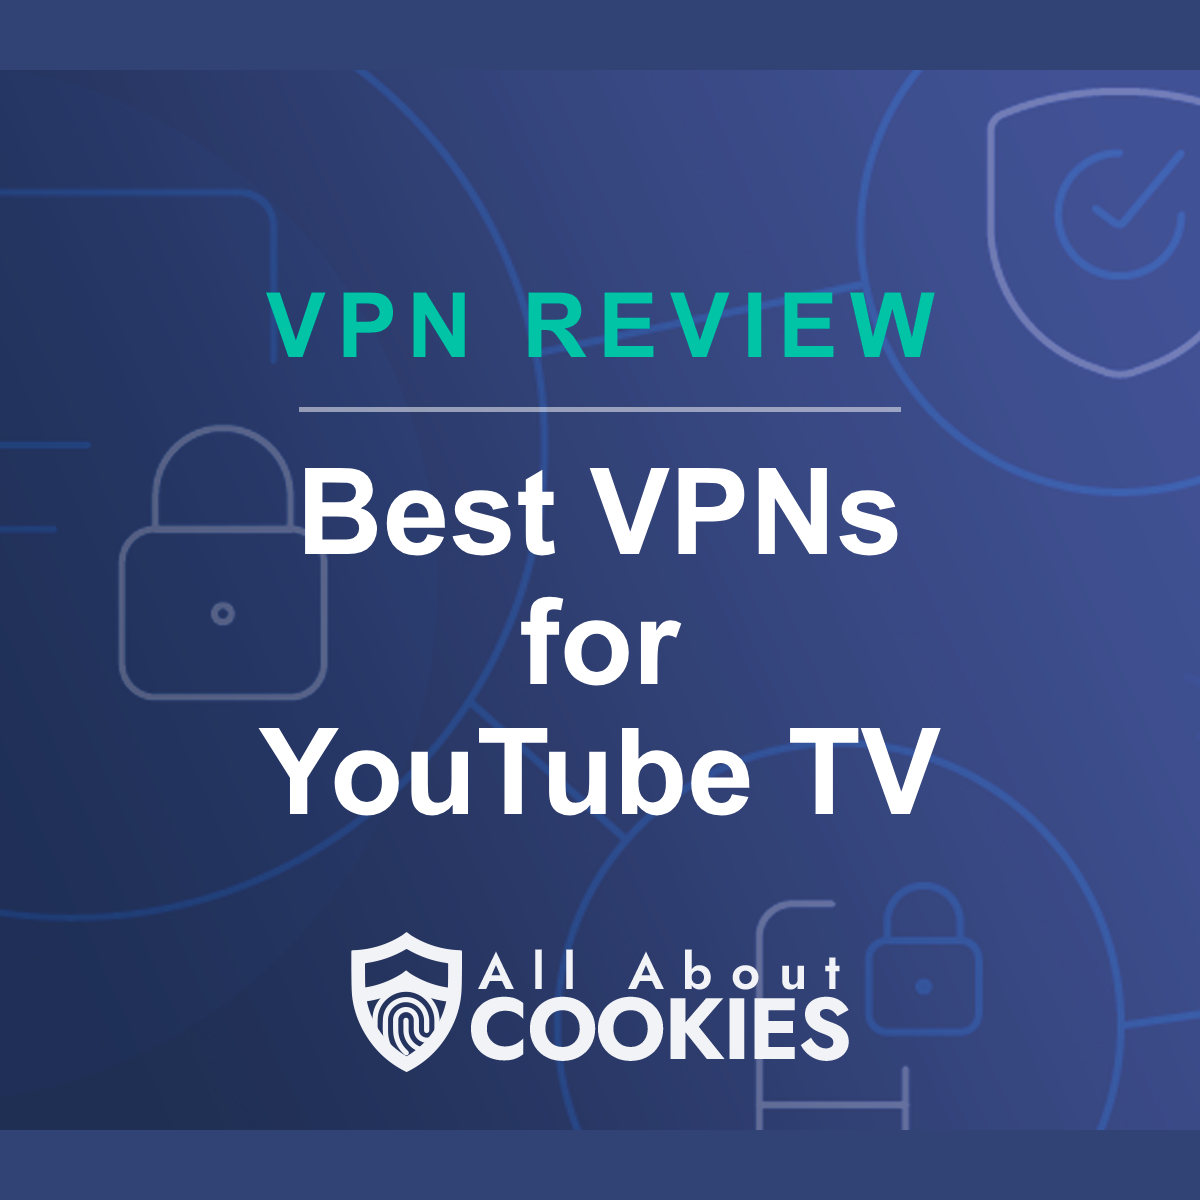 A blue background with images of locks and shields with the text &quot;Best VPNs for YouTube TV&quot; and the All About Cookies logo. 